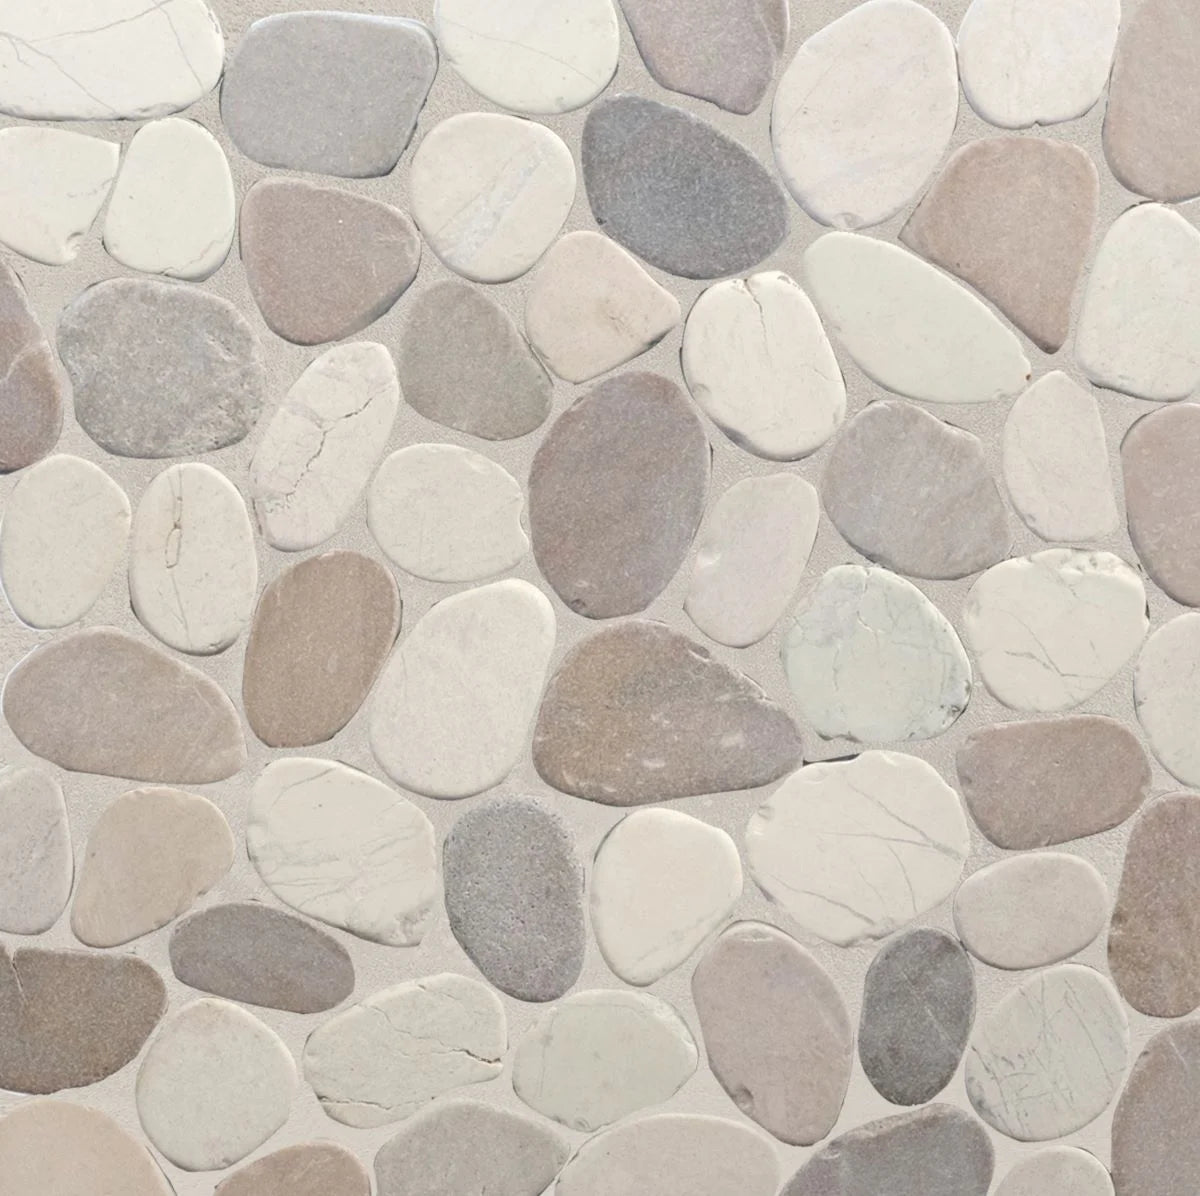 capucino sliced pebble tile sample with grout